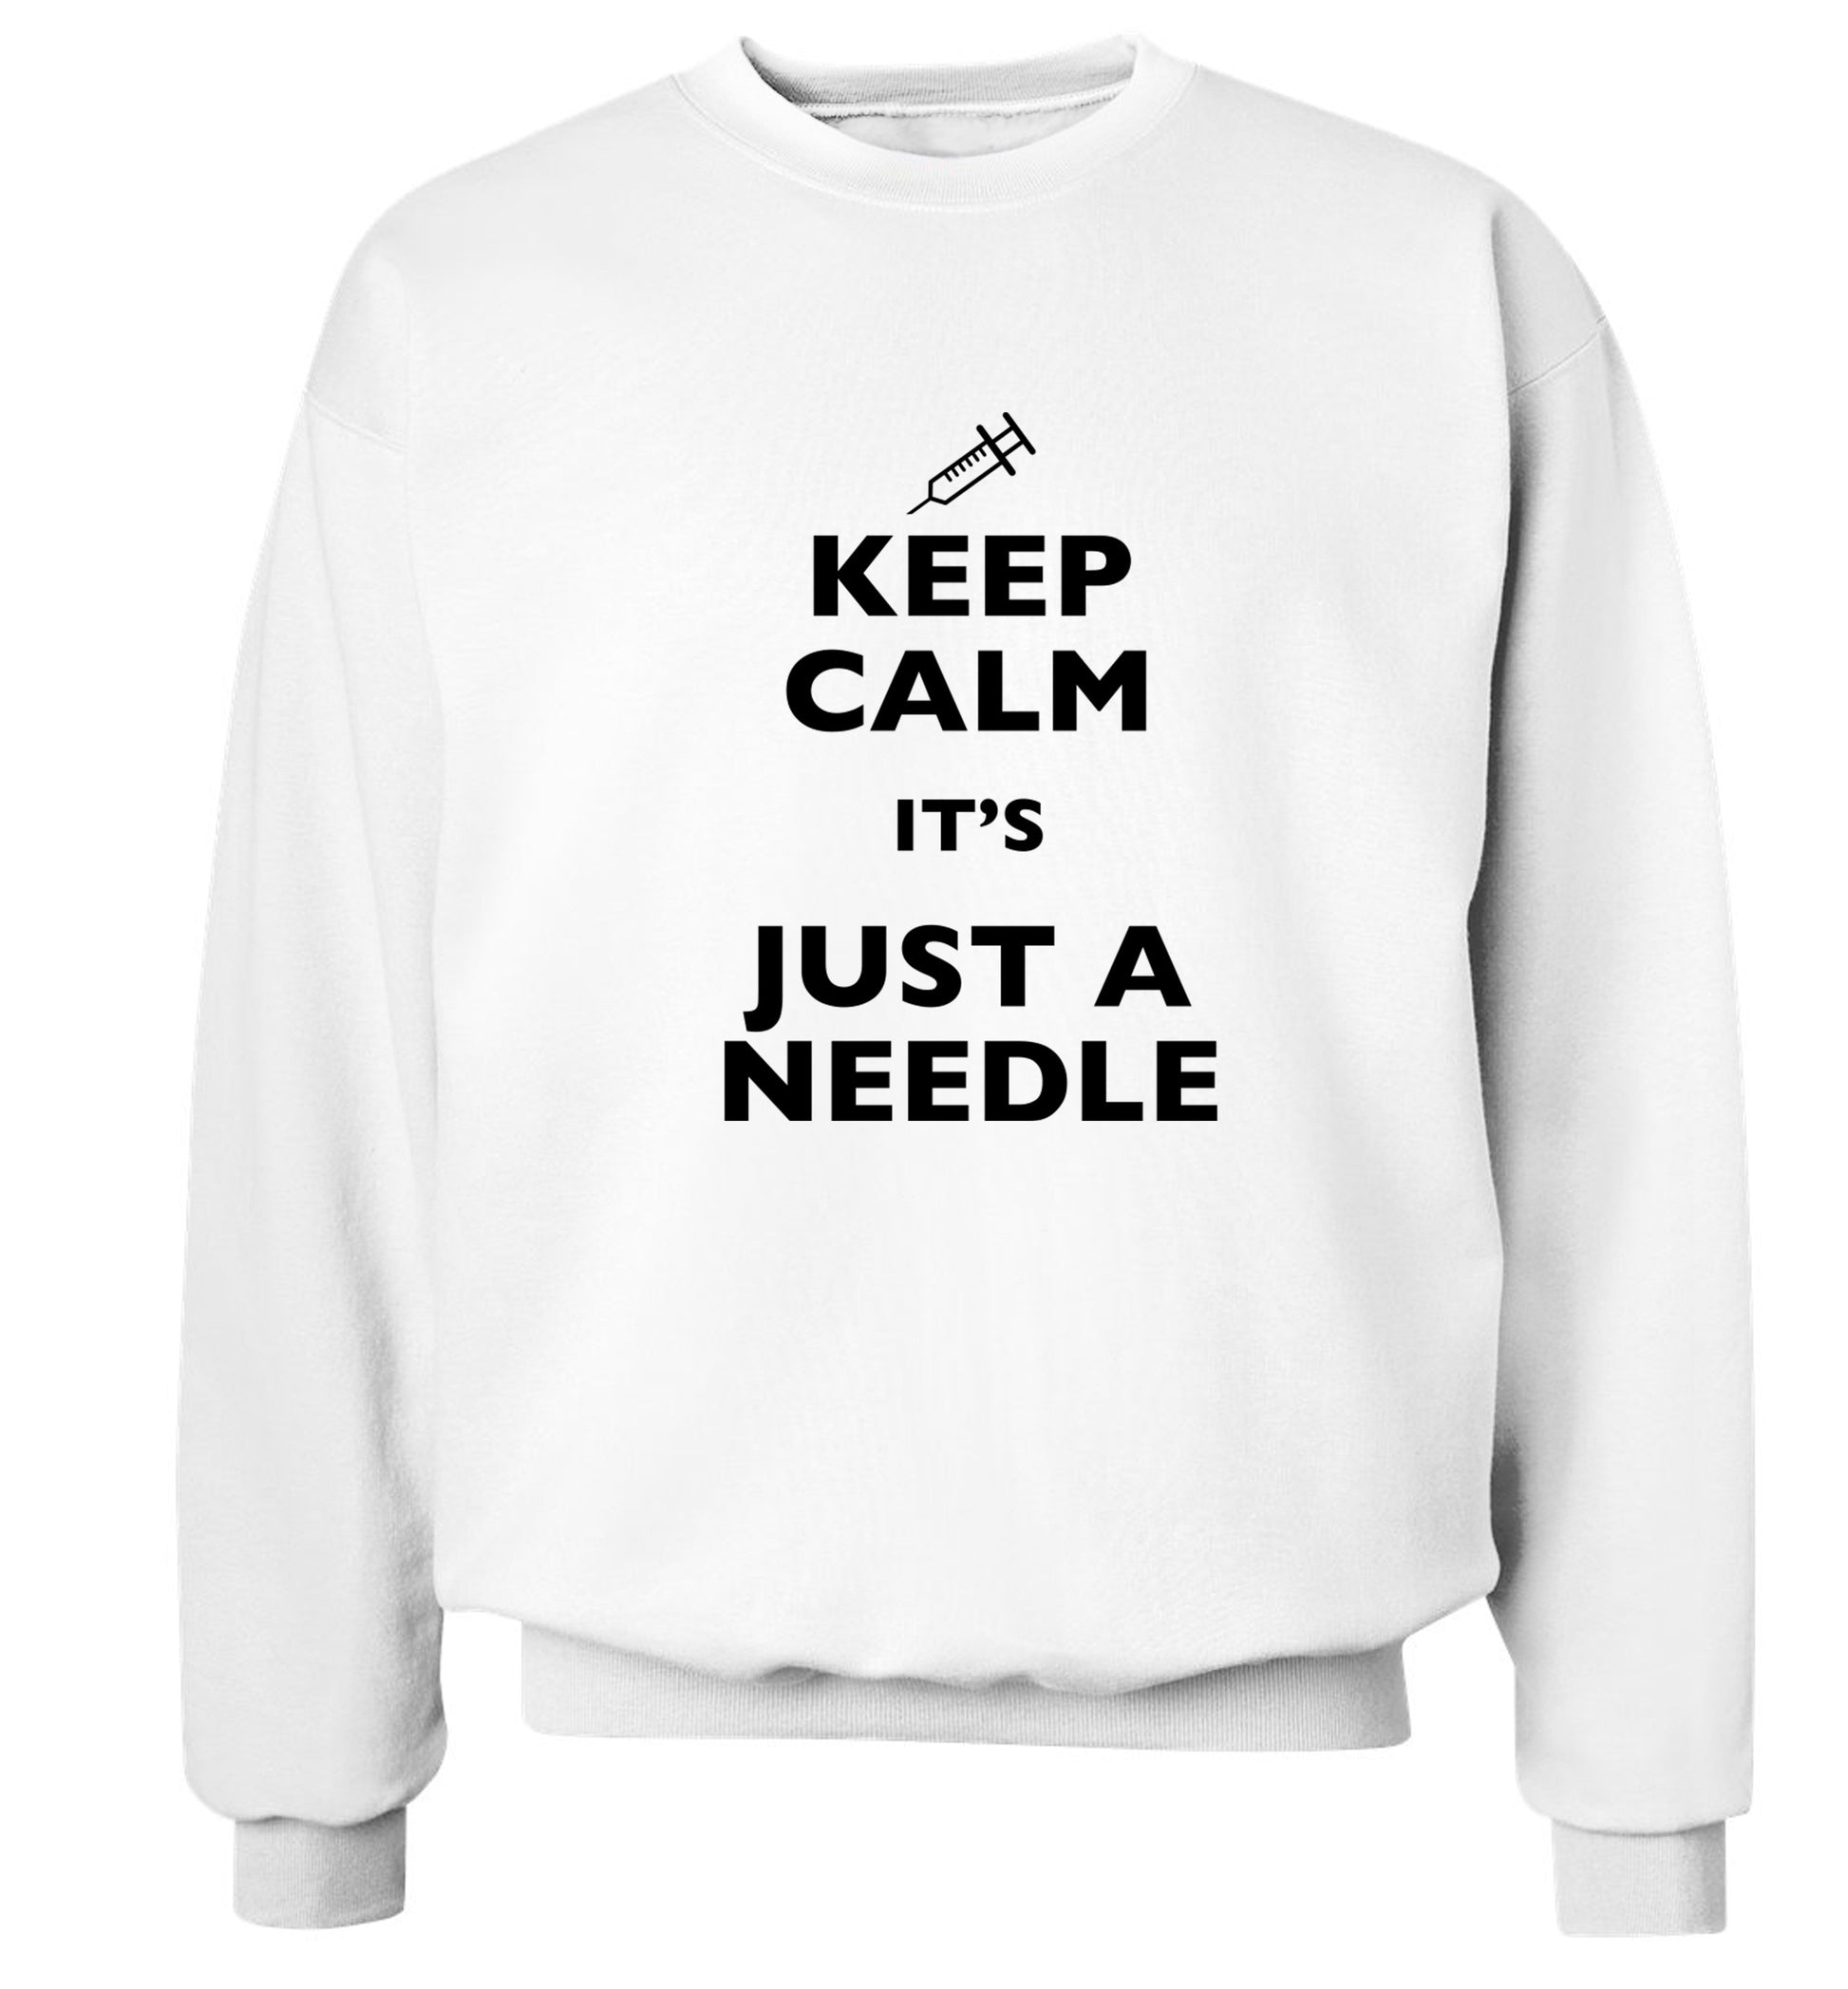 Keep calm it's only a needle Adult's unisex white Sweater 2XL